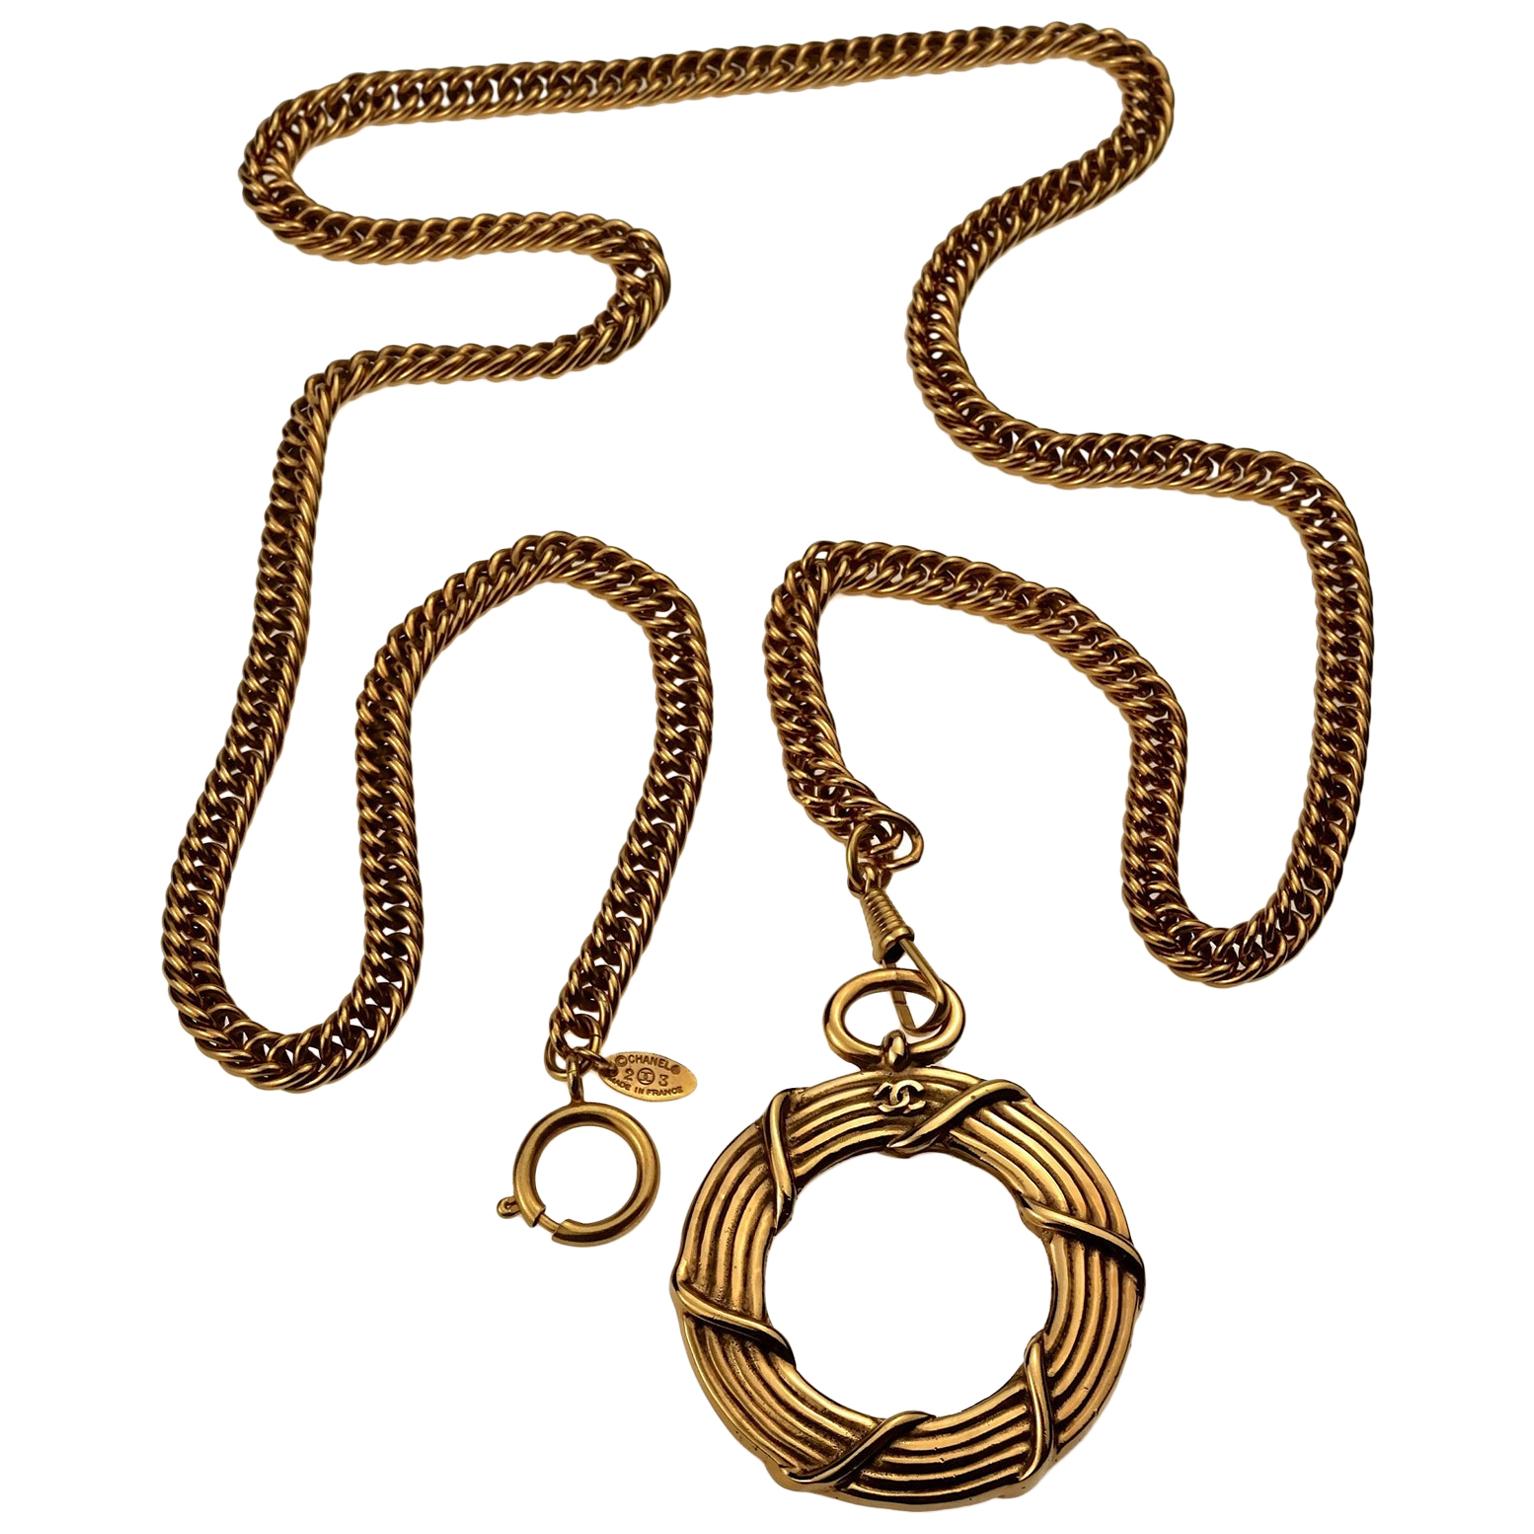 Vintage CHANEL Logo Magnifying Glass Chain Necklace